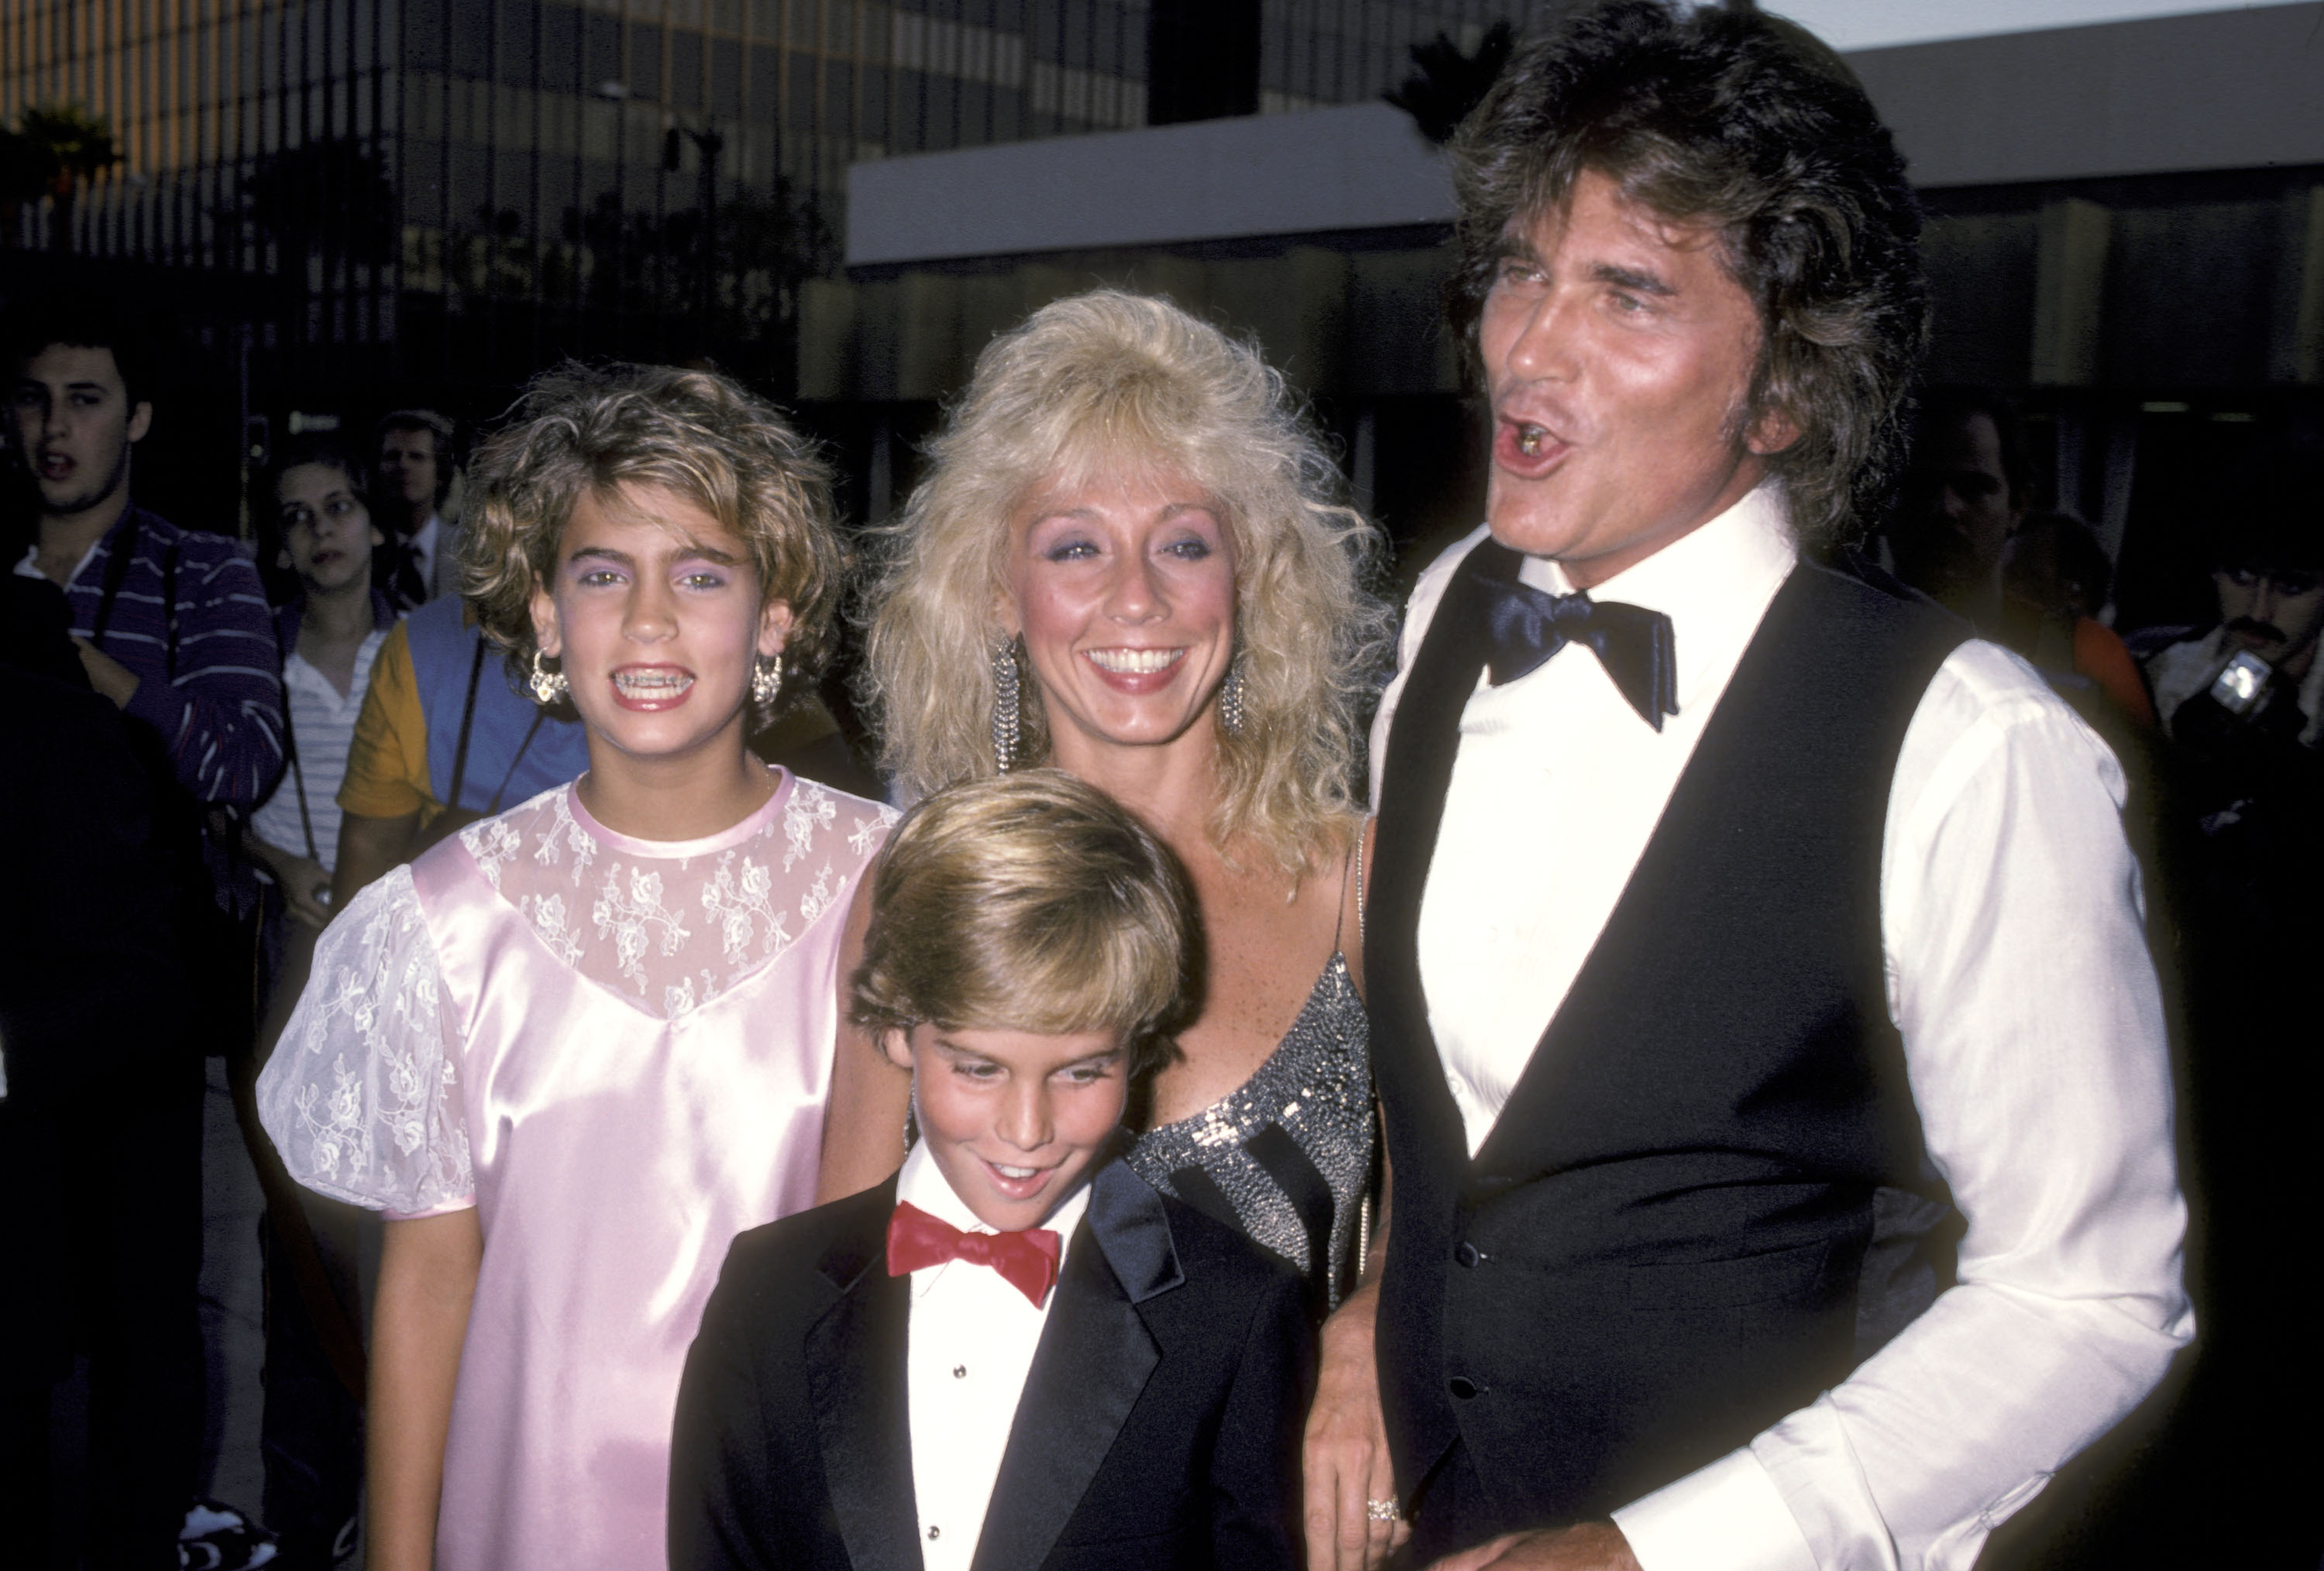 Shawna, Cindy, Christopher, and Michael Landon attend the Beverly Hills premiere of "Sam's Son," 1984 | Source: Getty Images